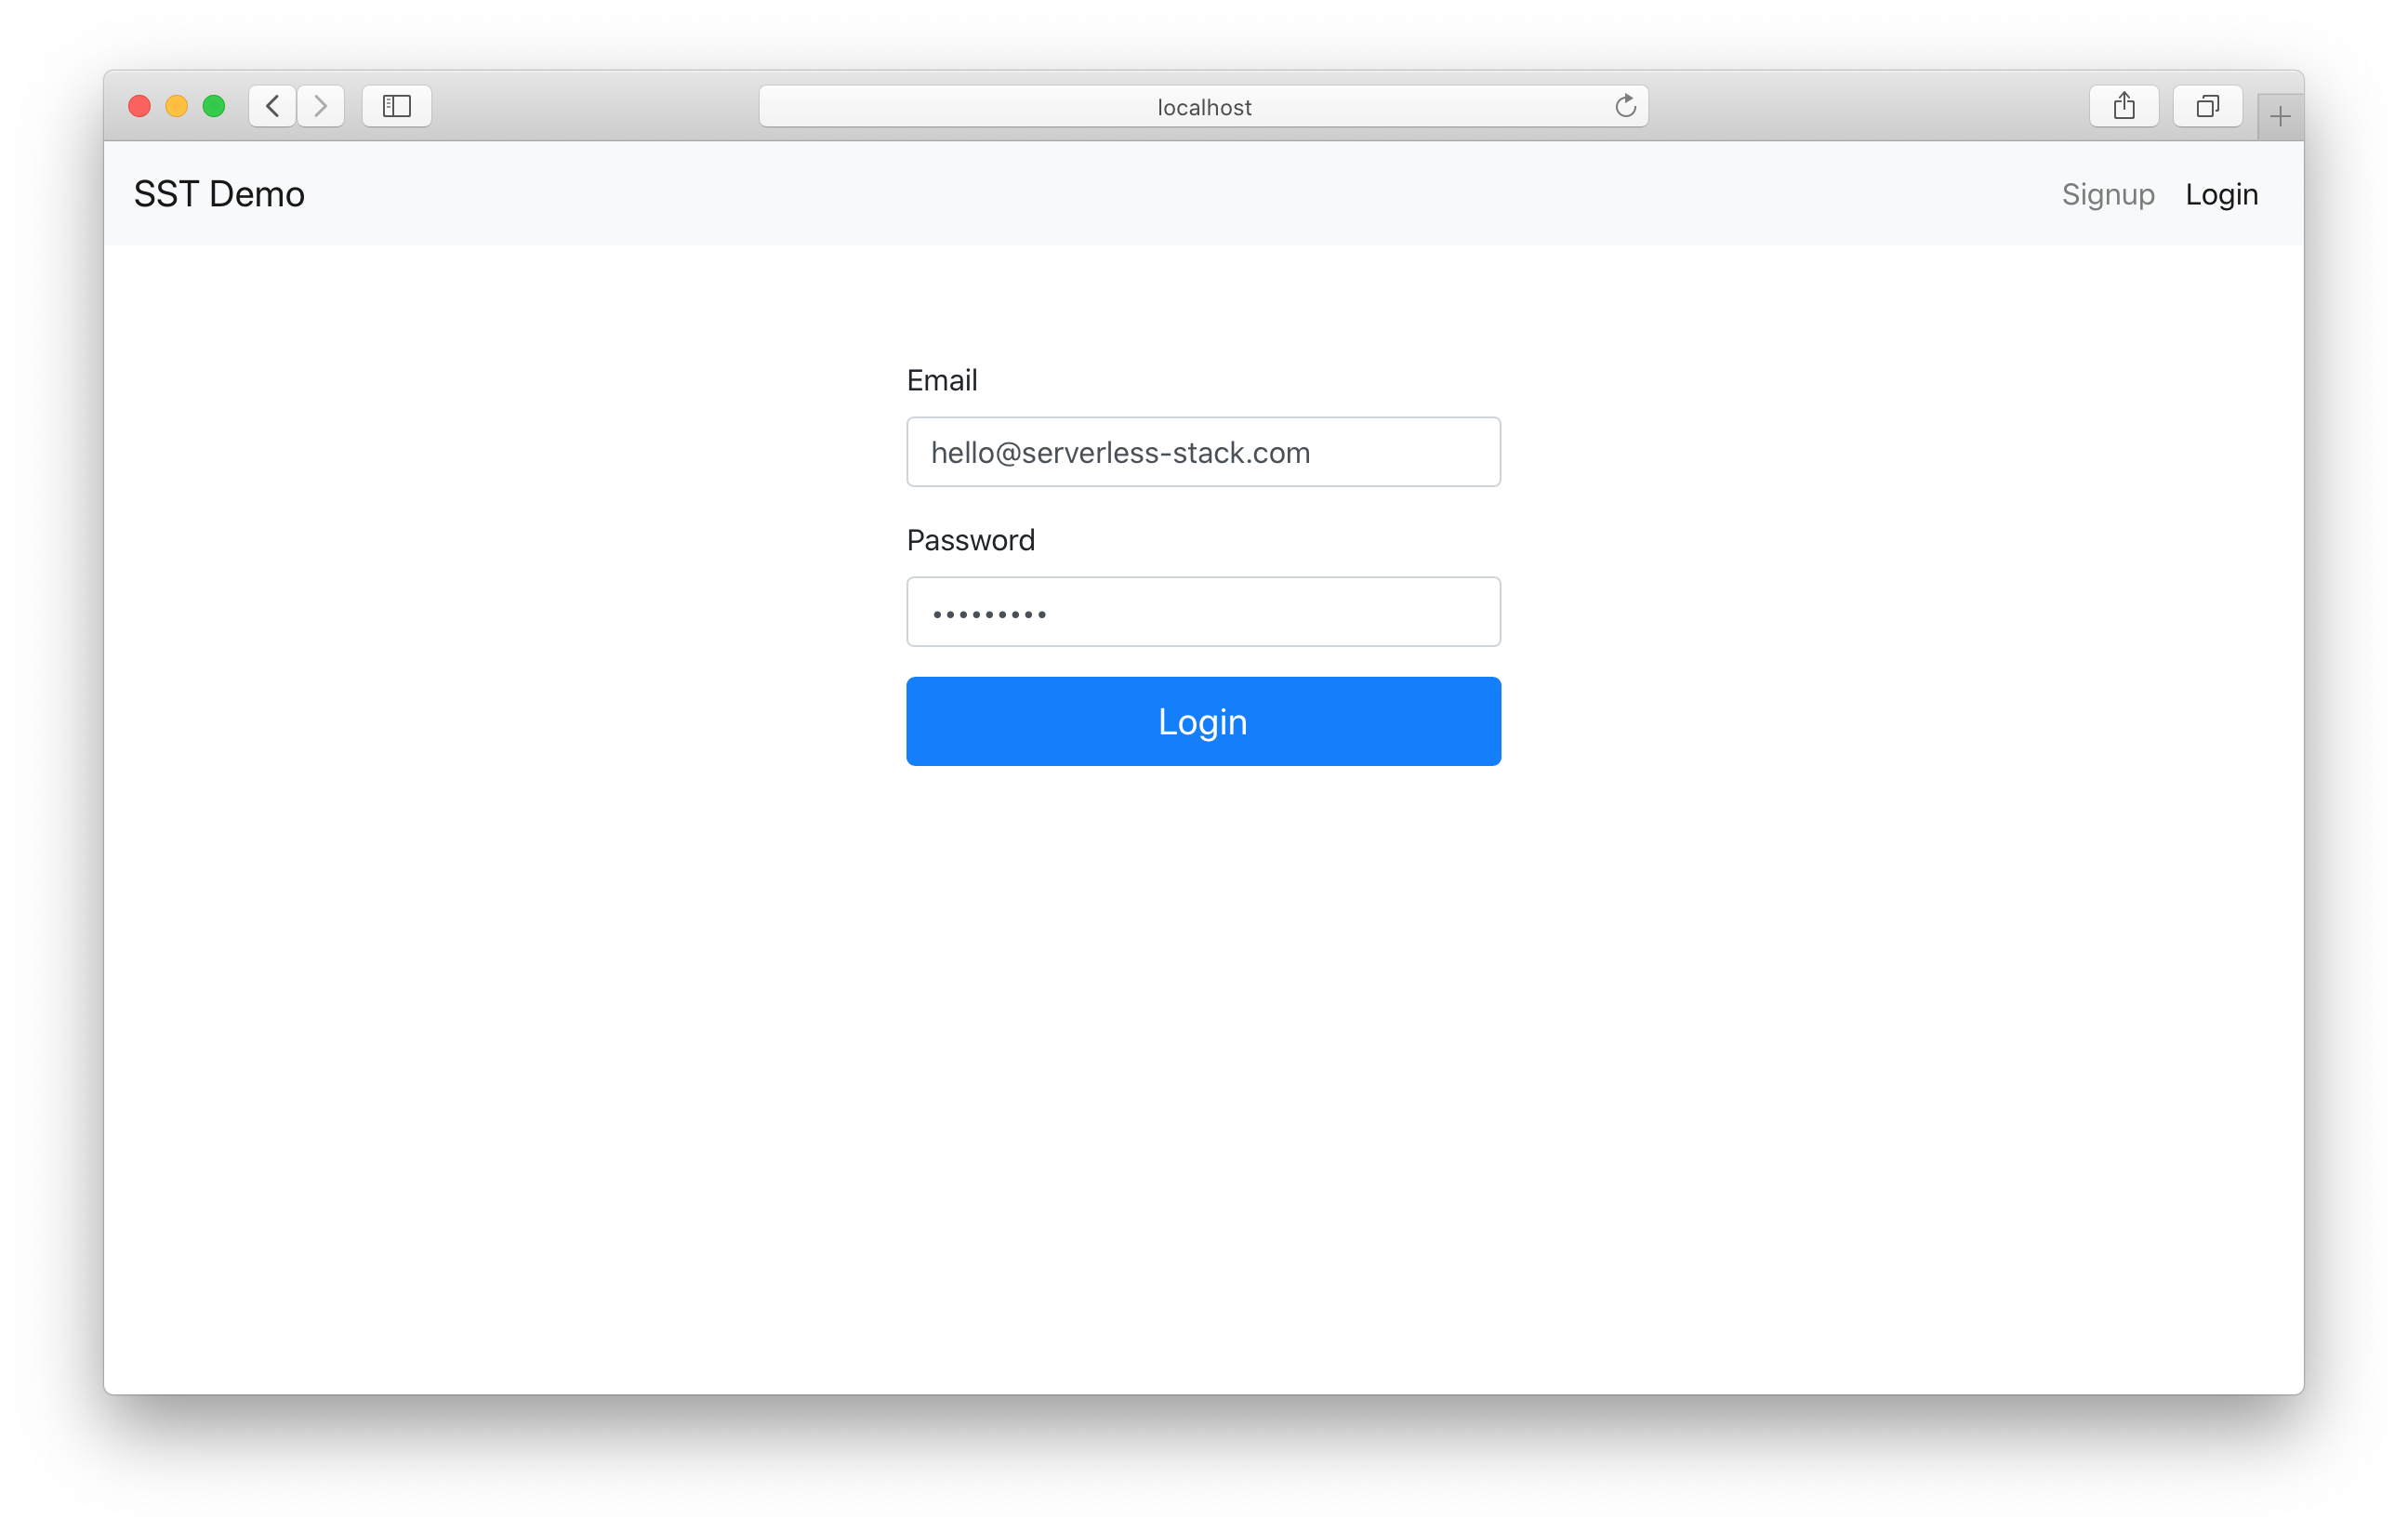 Login with Cognito in React.js app